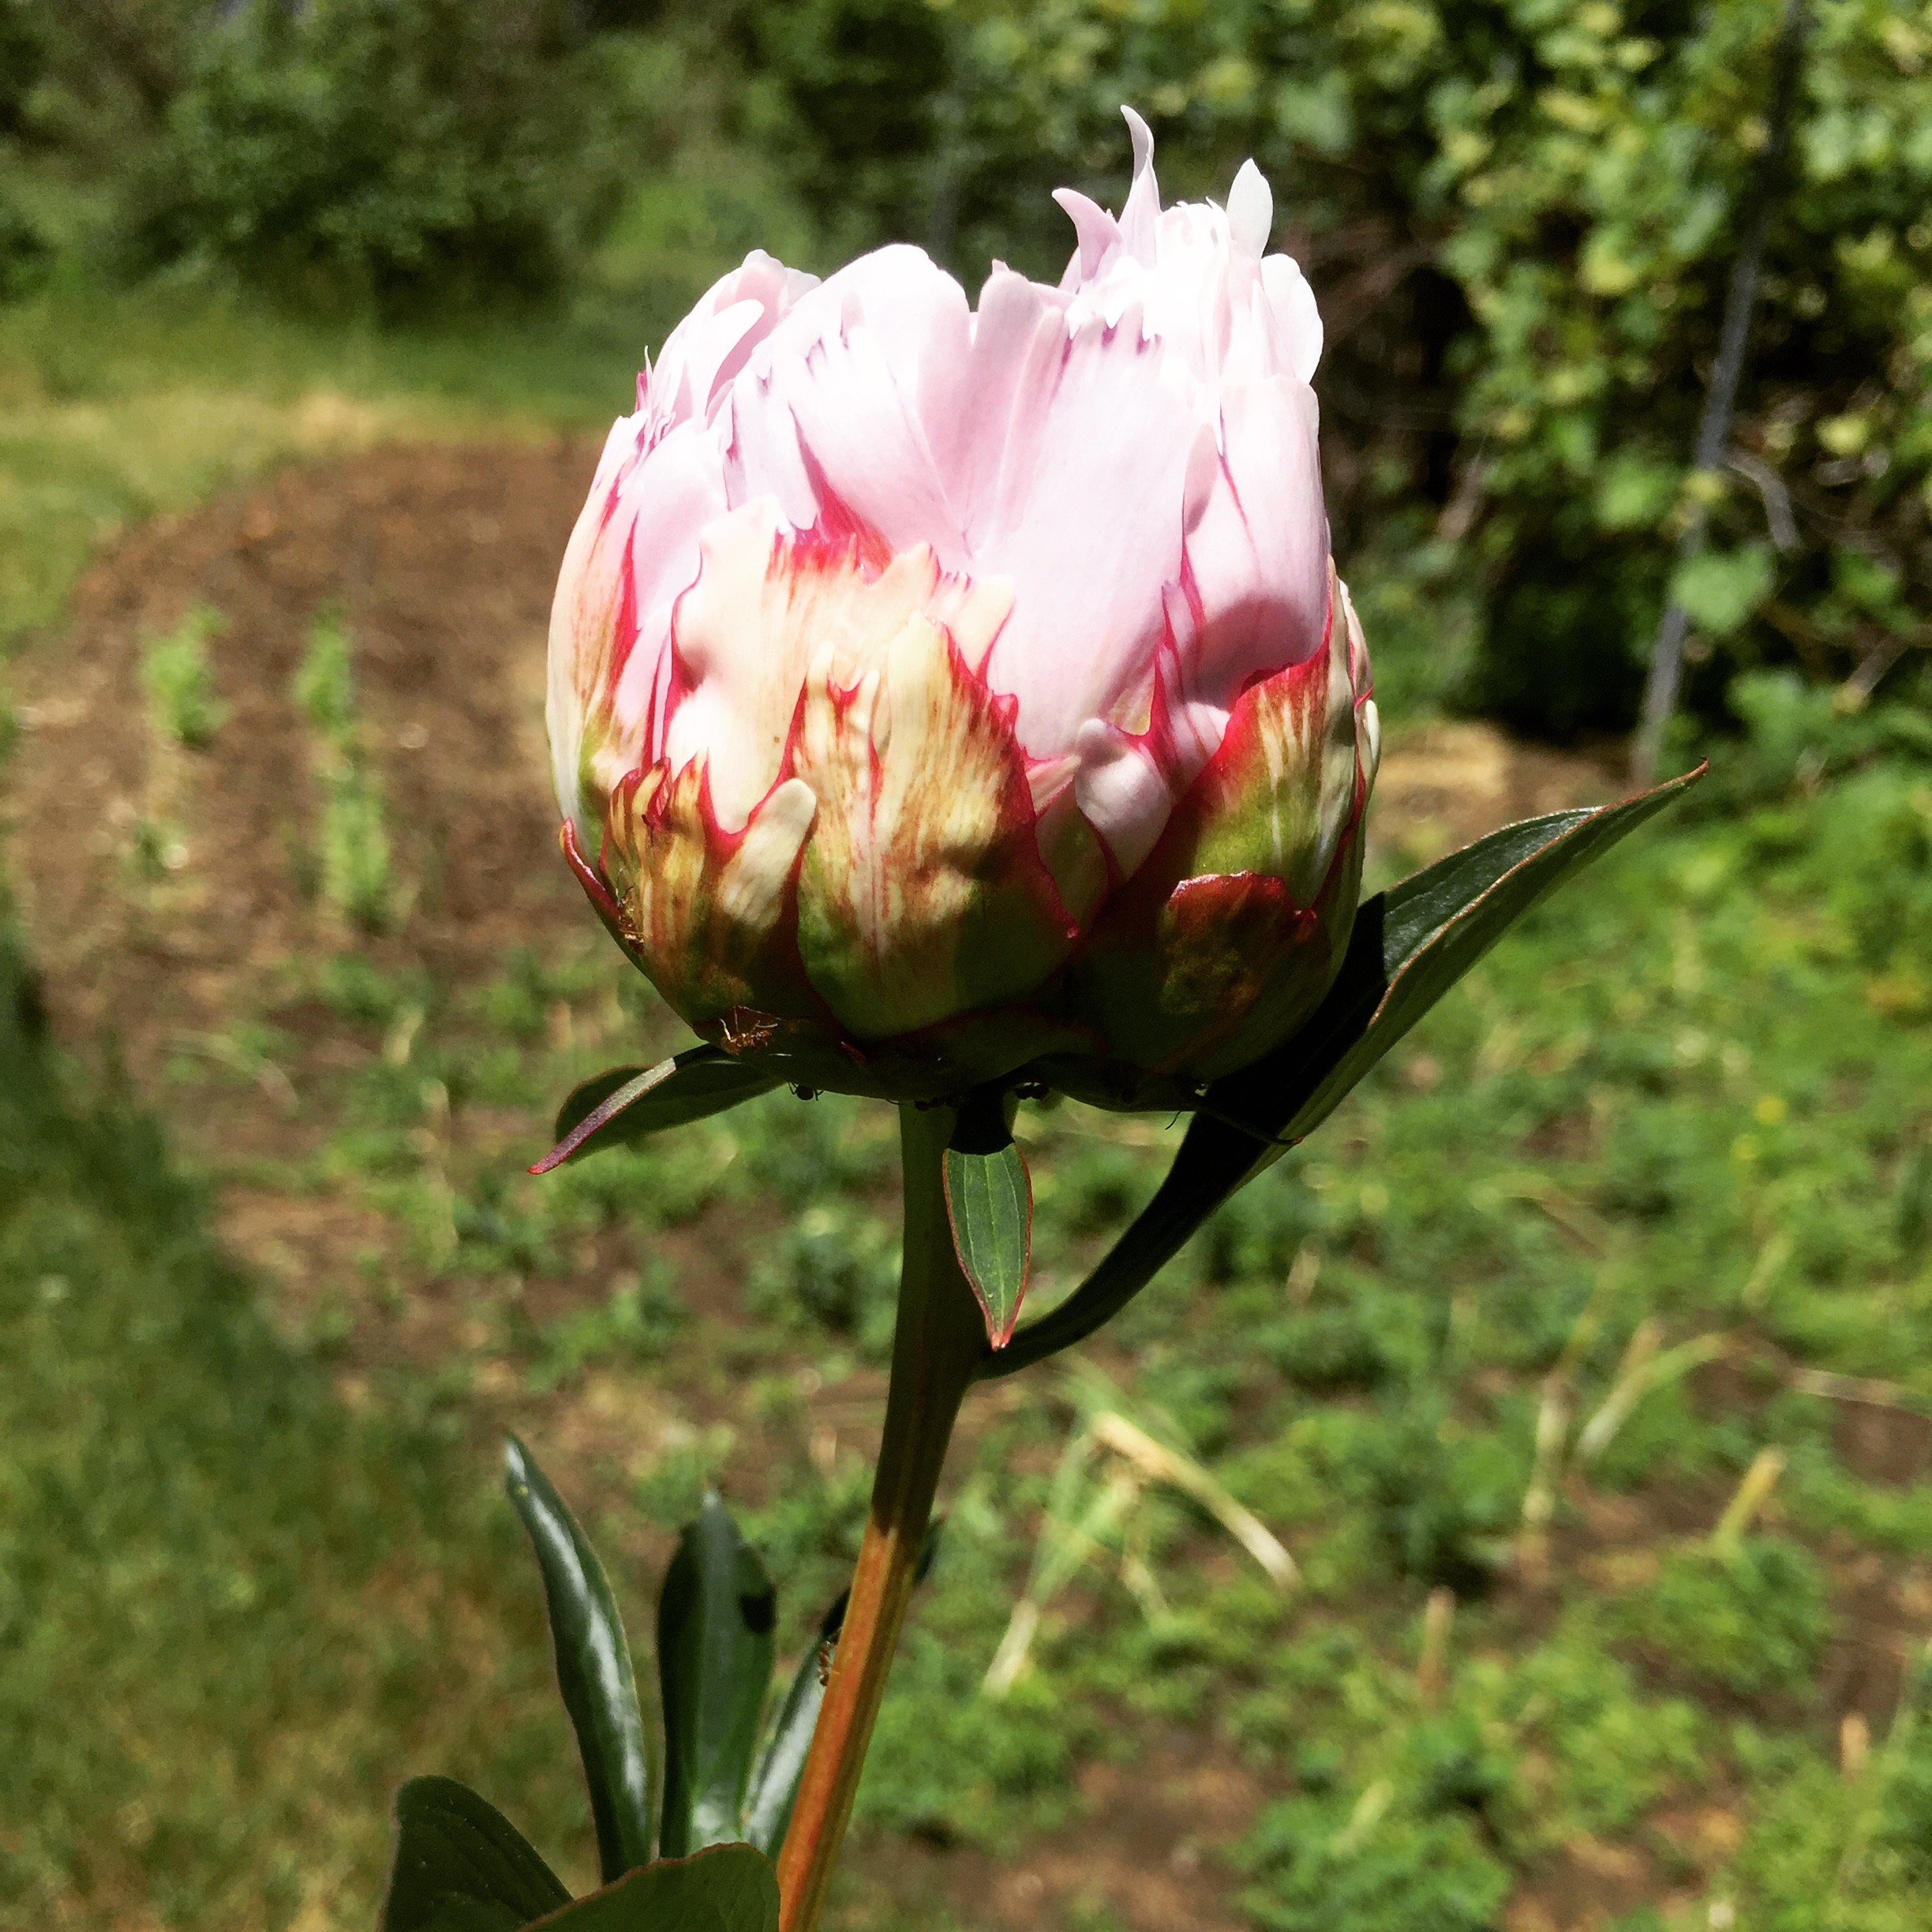  And one more peony on its way. 